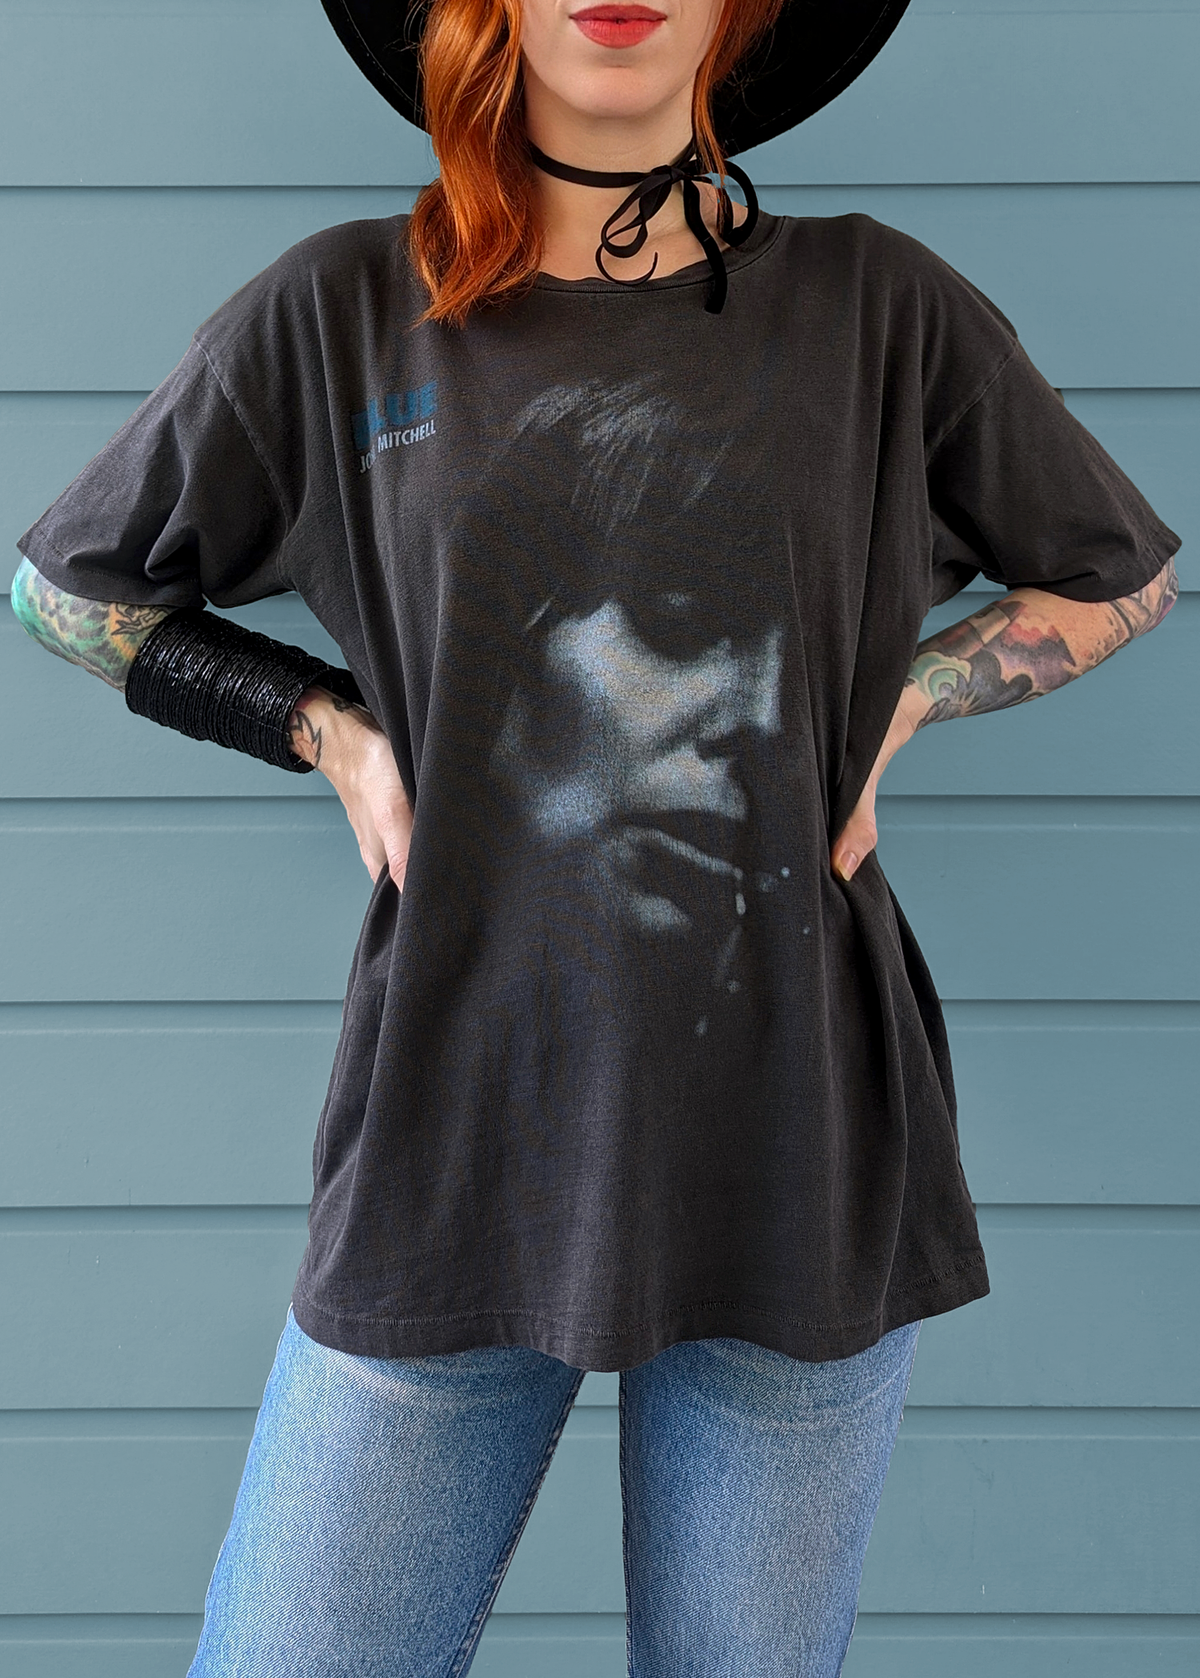 Washed Black Joni Mitchell Blue Oversized Tee by daydreamer la, officially licensed and made in california